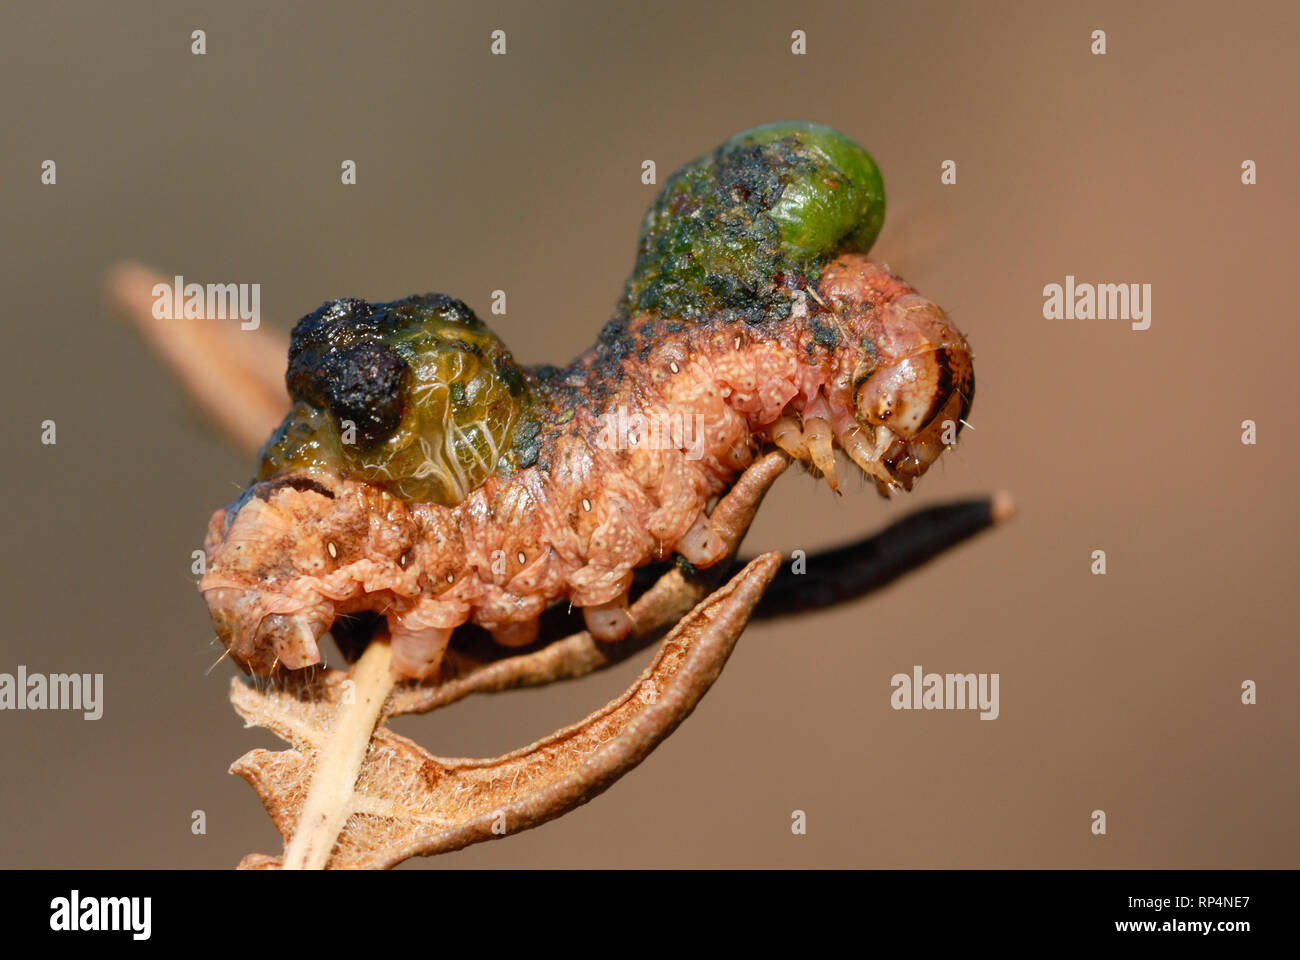 Caterpillar infected by a virus Stock Photo